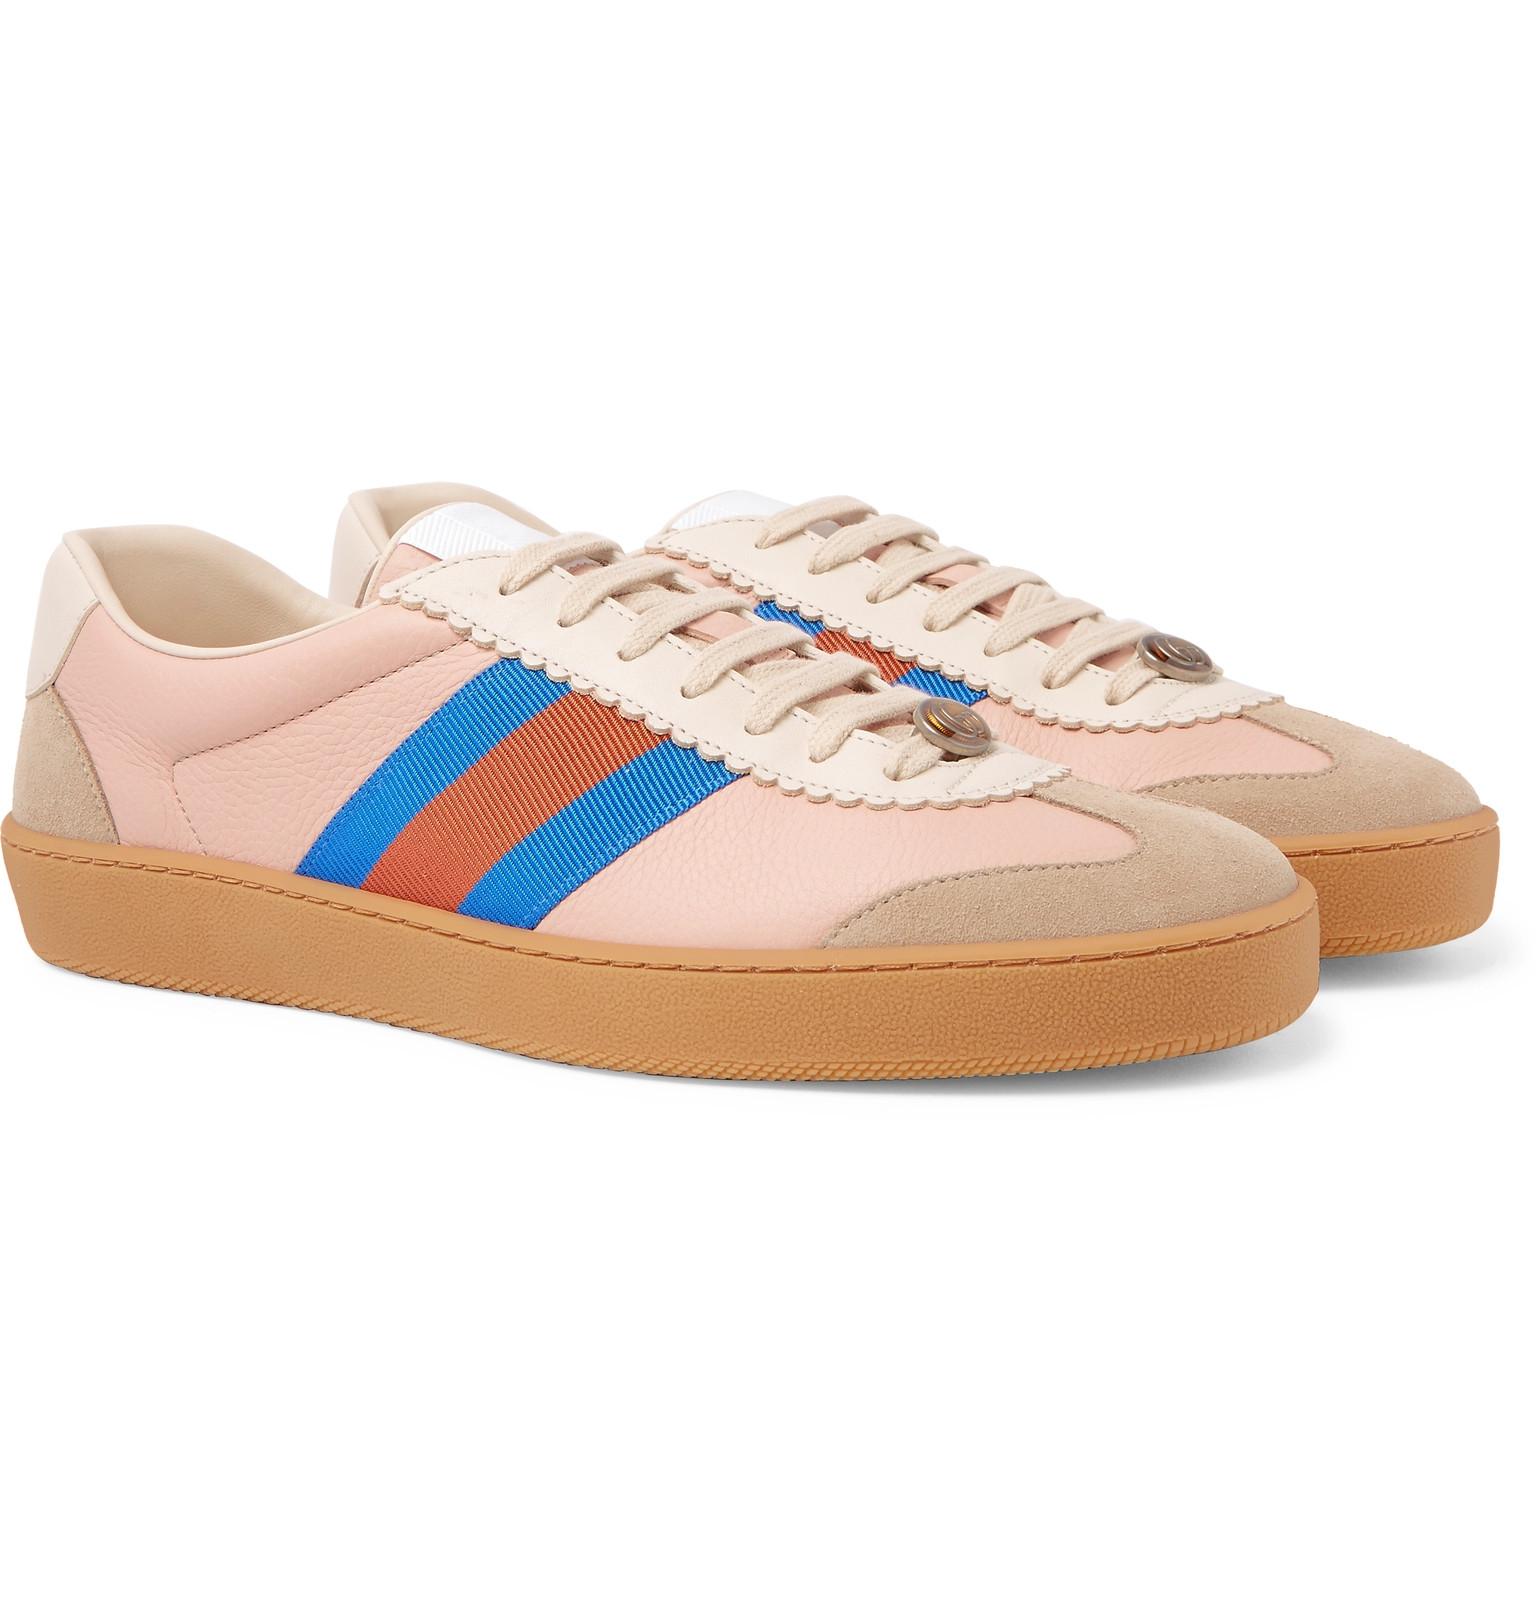 mens pink gucci sneakers